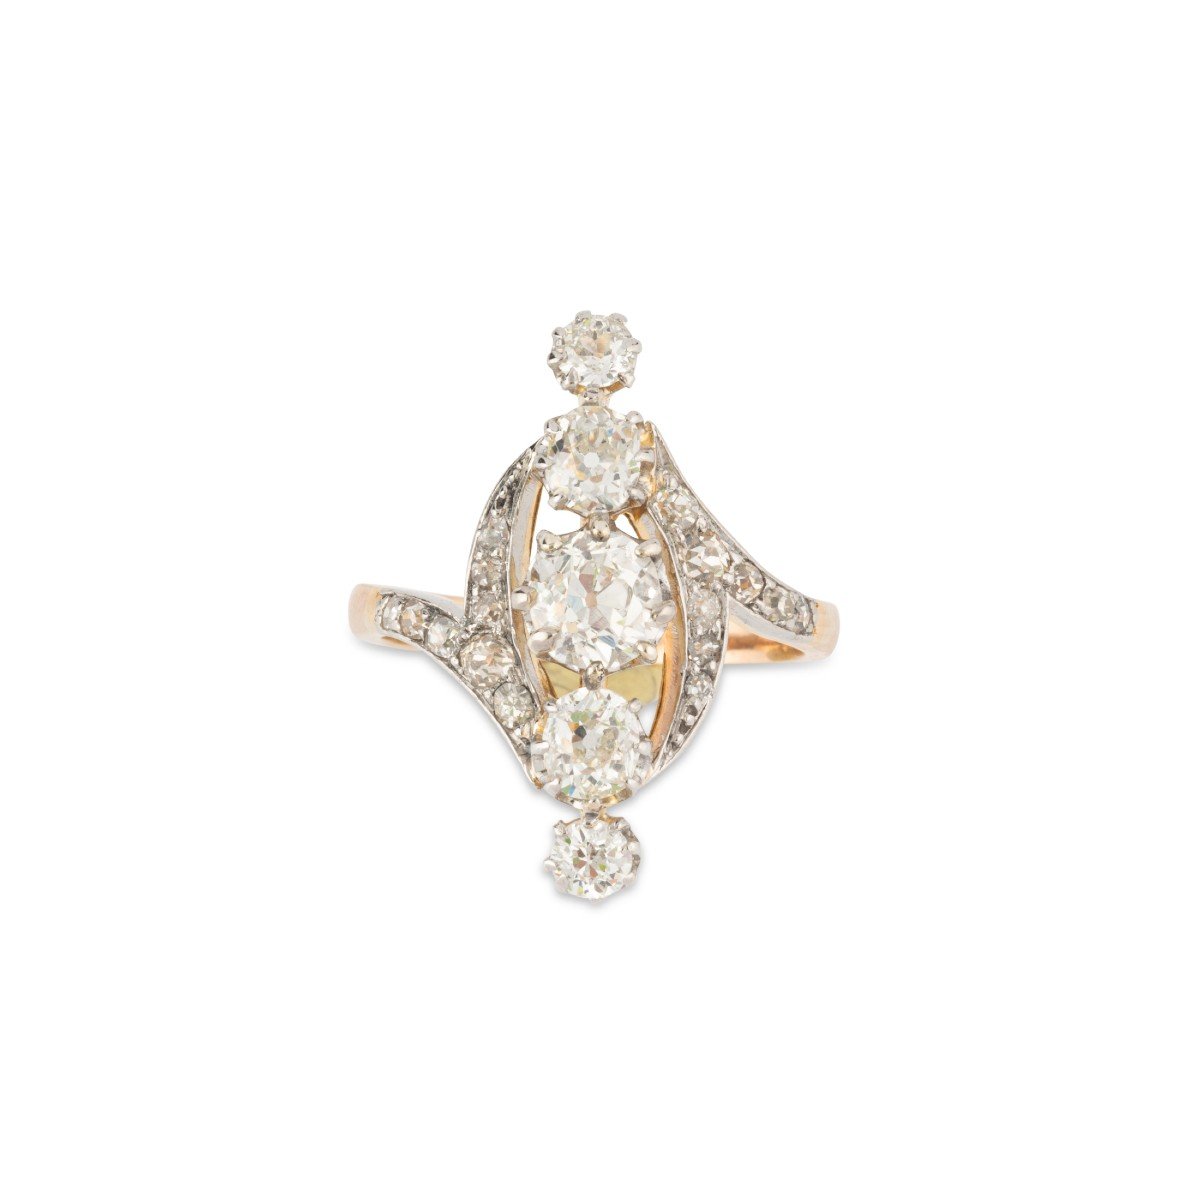 Bague or marquise diamants